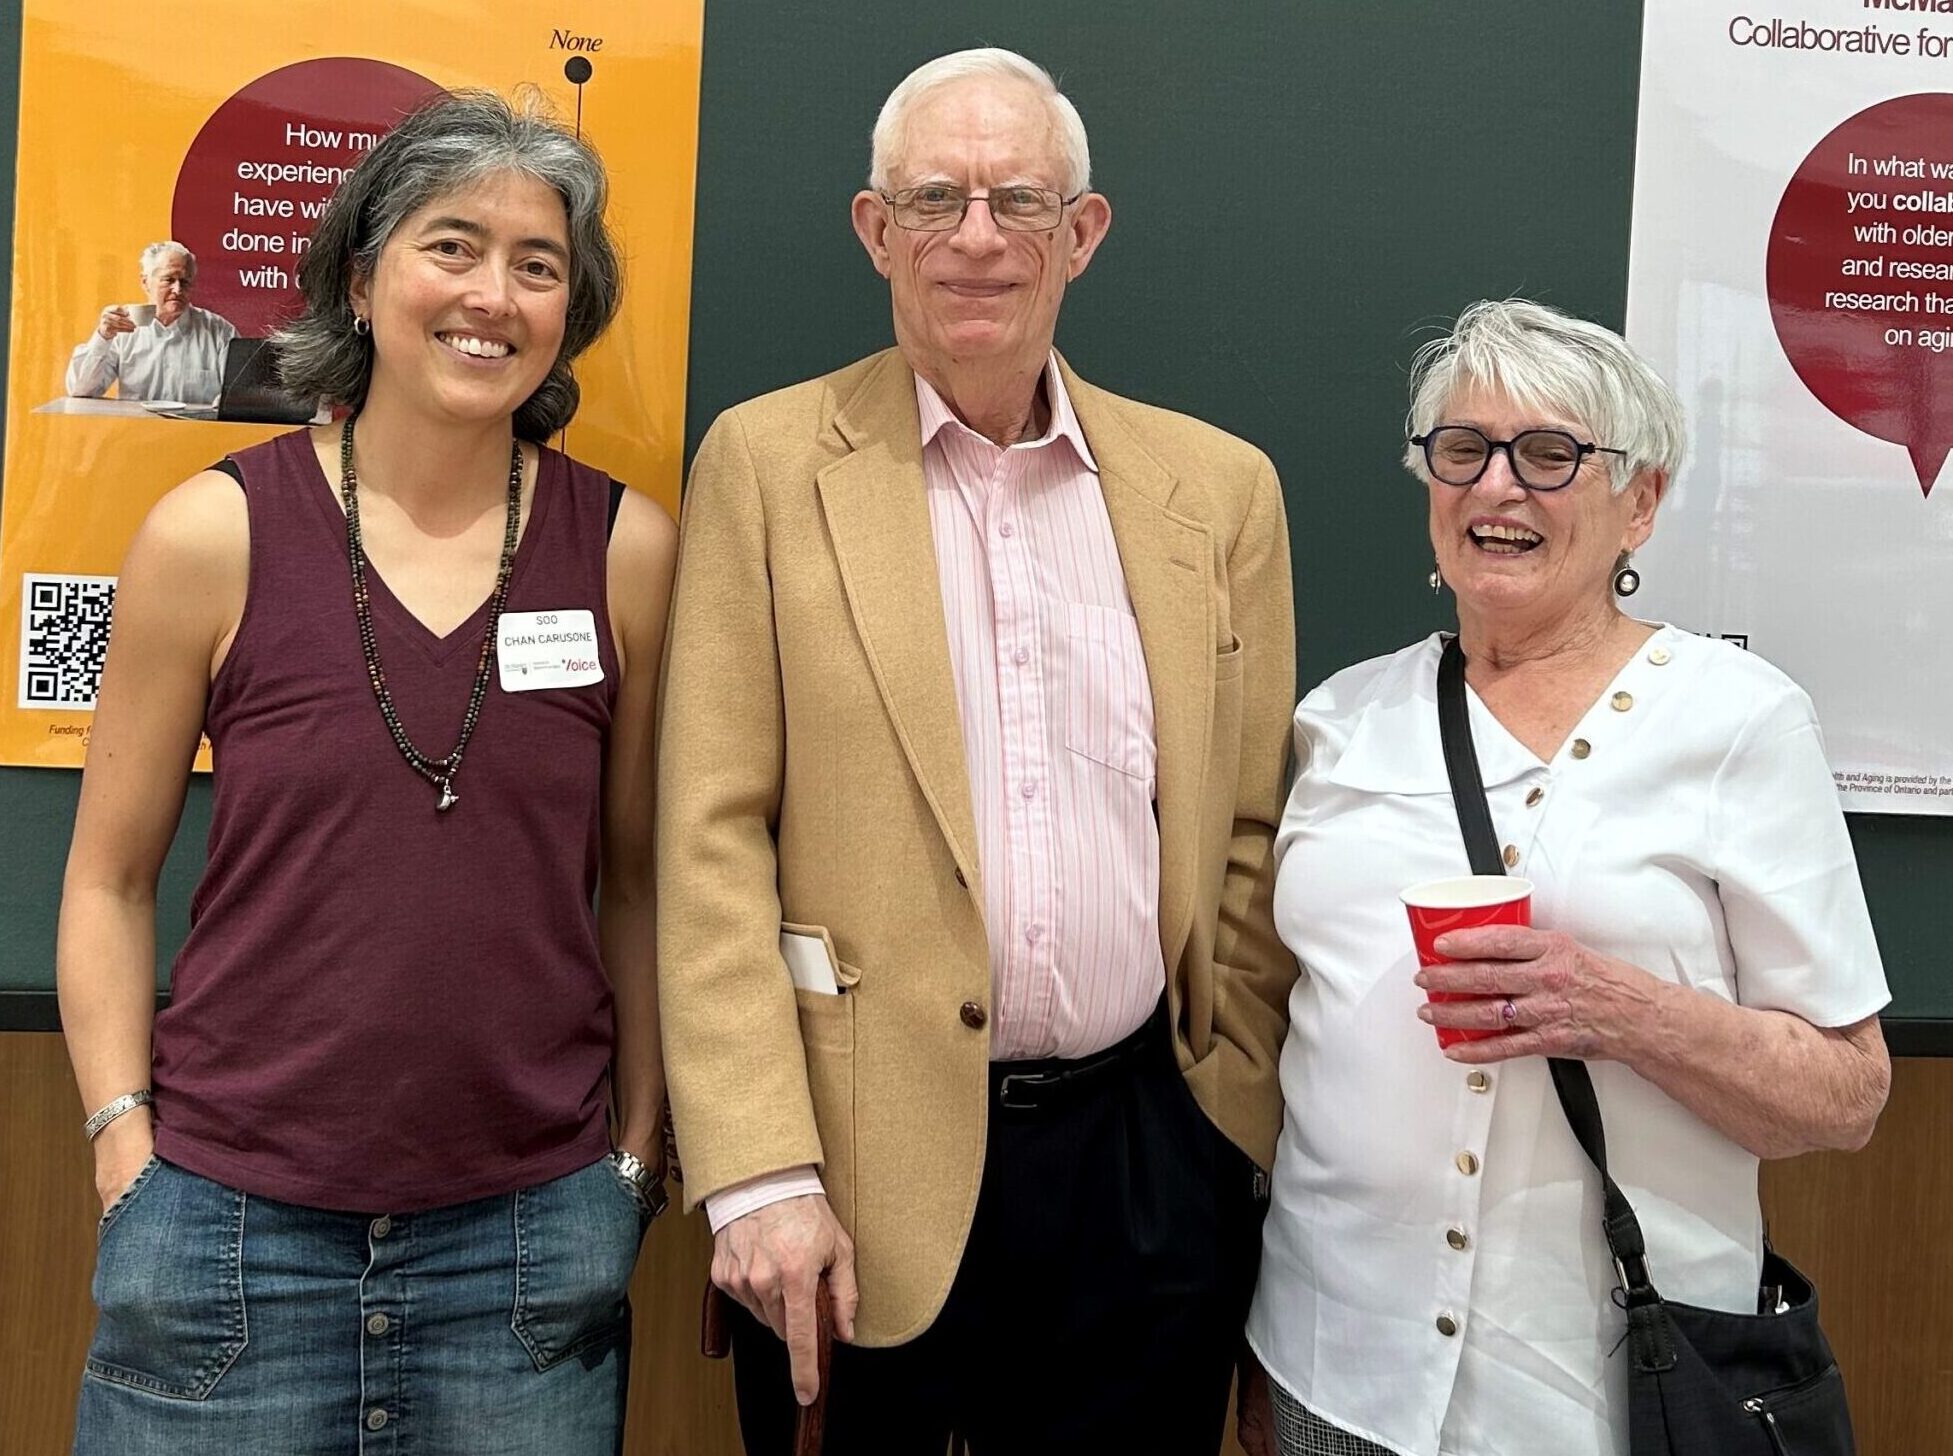 Older adult partner and caregiver Michael Kirk (centre) with McMaster Collaborative’s Managing Director, Dr. Soo Chan Carusone (left), and another older adult partner Donna Weldon.